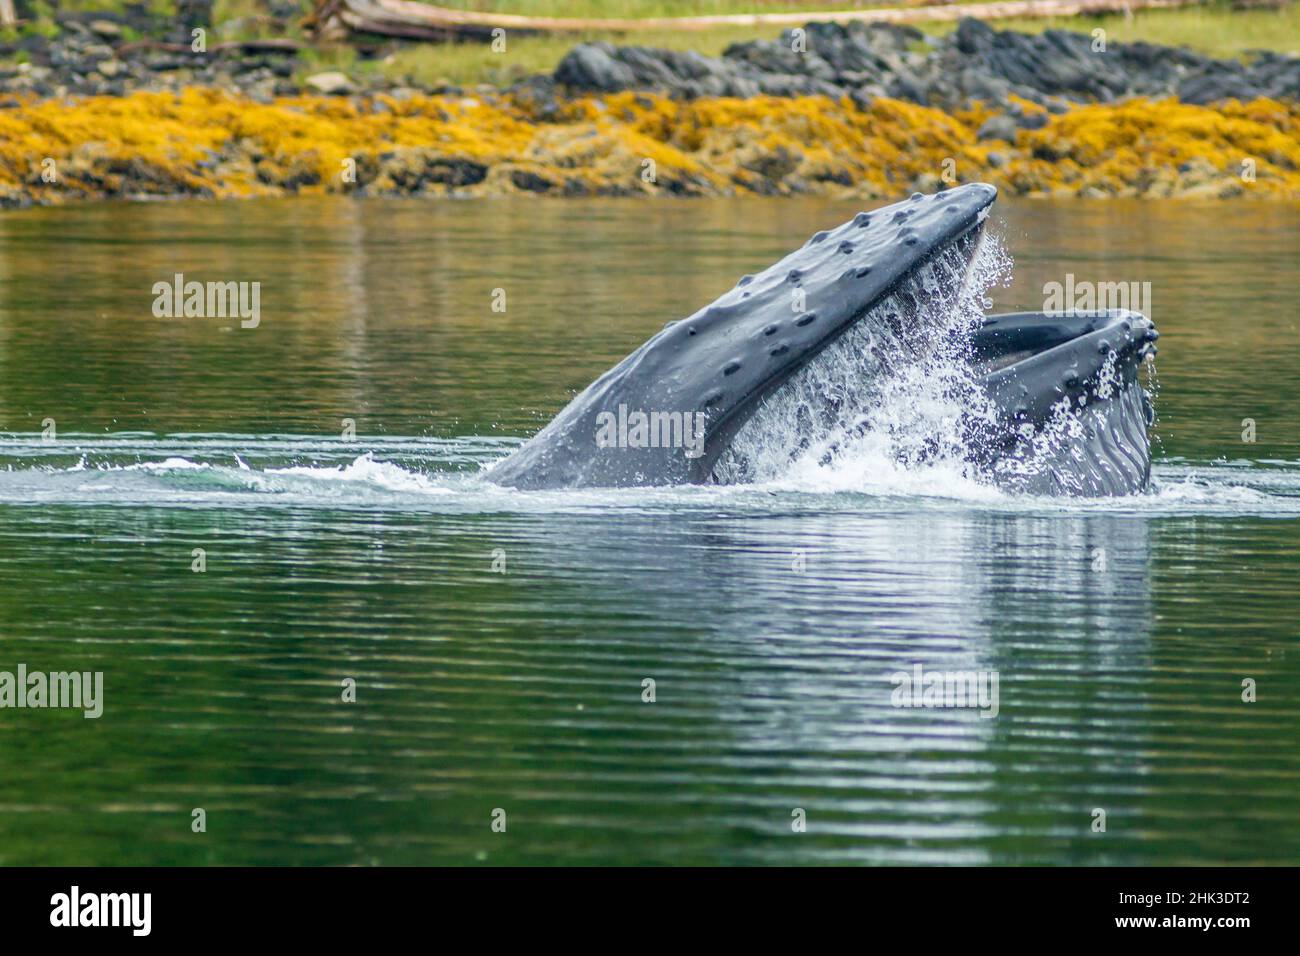 USA, Alaska, Tongass National Forest. Humpback whale lunge feeds. Credit as: Cathy & Gordon Illg / Jaynes Gallery / DanitaDelimont.com Stock Photo